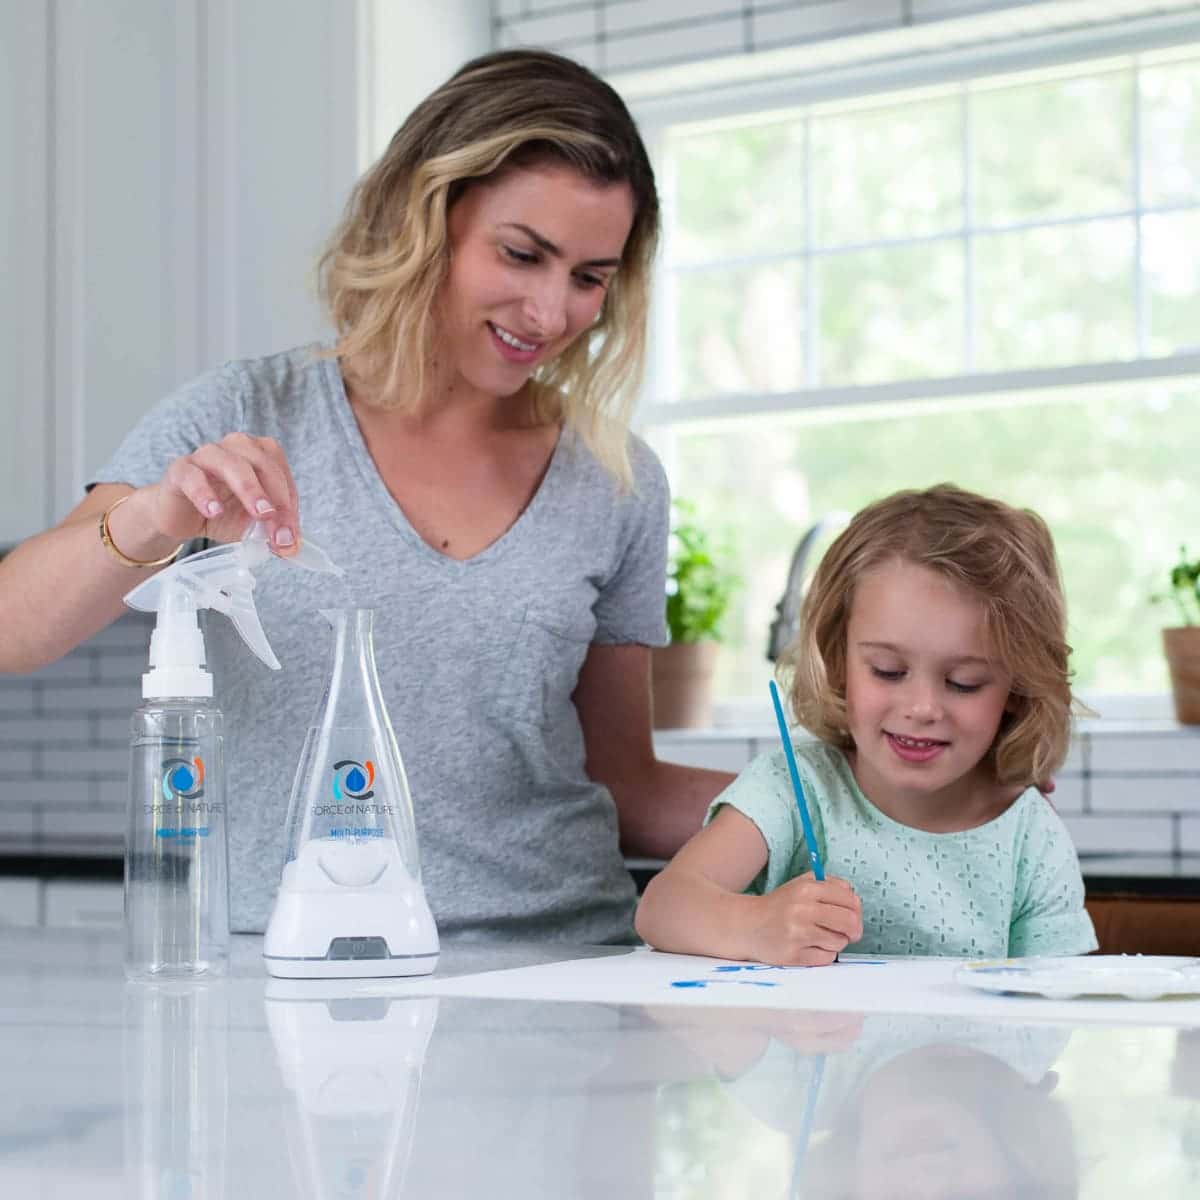 Force of Nature being made in the kitchen by a woman with her child next to her. Showing that this cleaner is non-toxic and can be used around children.